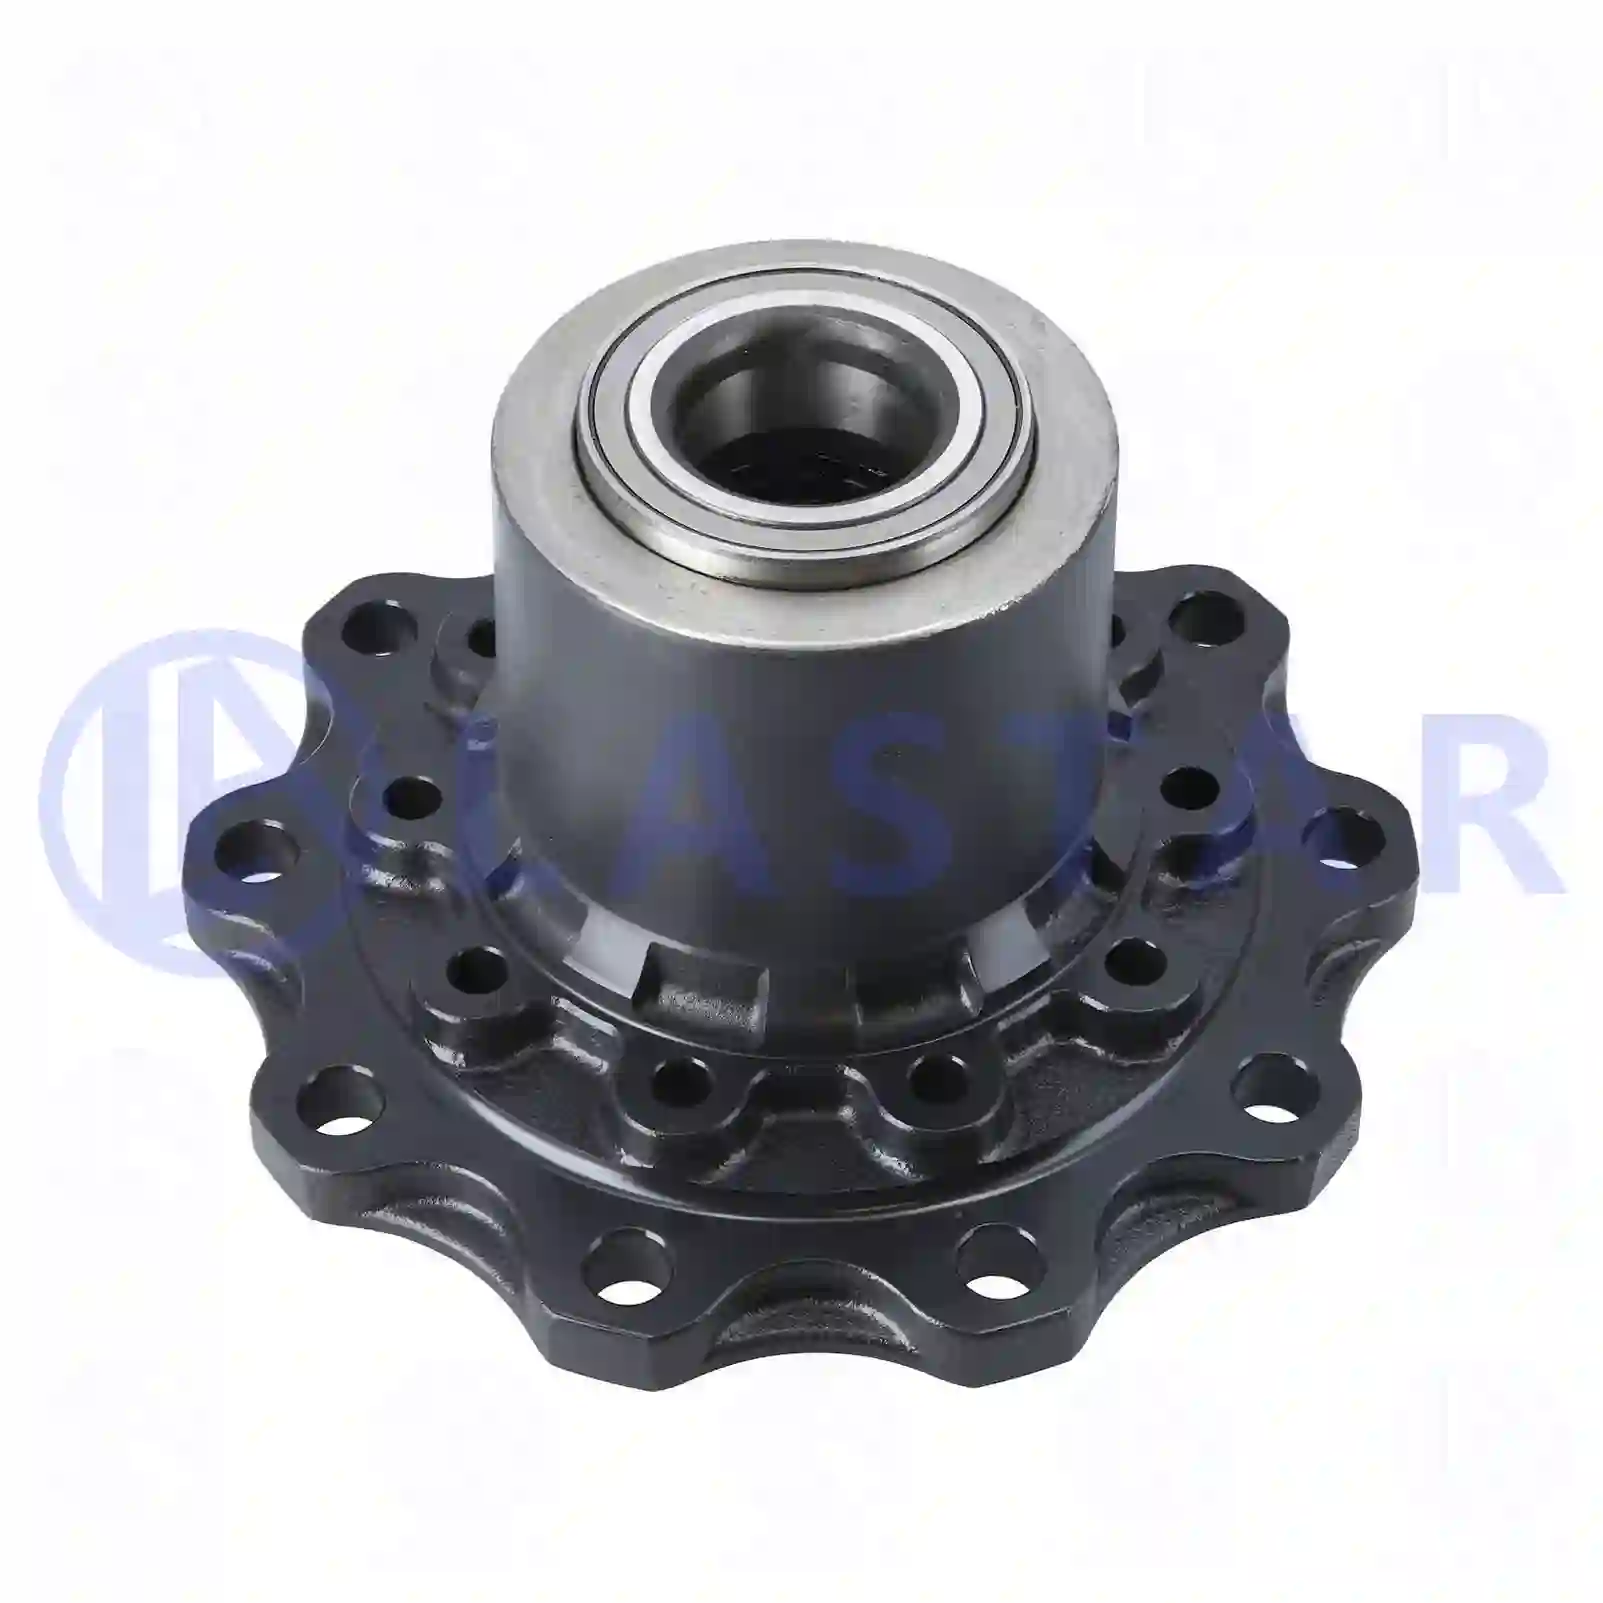 Wheel hub, with bearing, 77726837, 1480933S, 1724406S, 1868663S, ZG30202-0008, , , , ||  77726837 Lastar Spare Part | Truck Spare Parts, Auotomotive Spare Parts Wheel hub, with bearing, 77726837, 1480933S, 1724406S, 1868663S, ZG30202-0008, , , , ||  77726837 Lastar Spare Part | Truck Spare Parts, Auotomotive Spare Parts